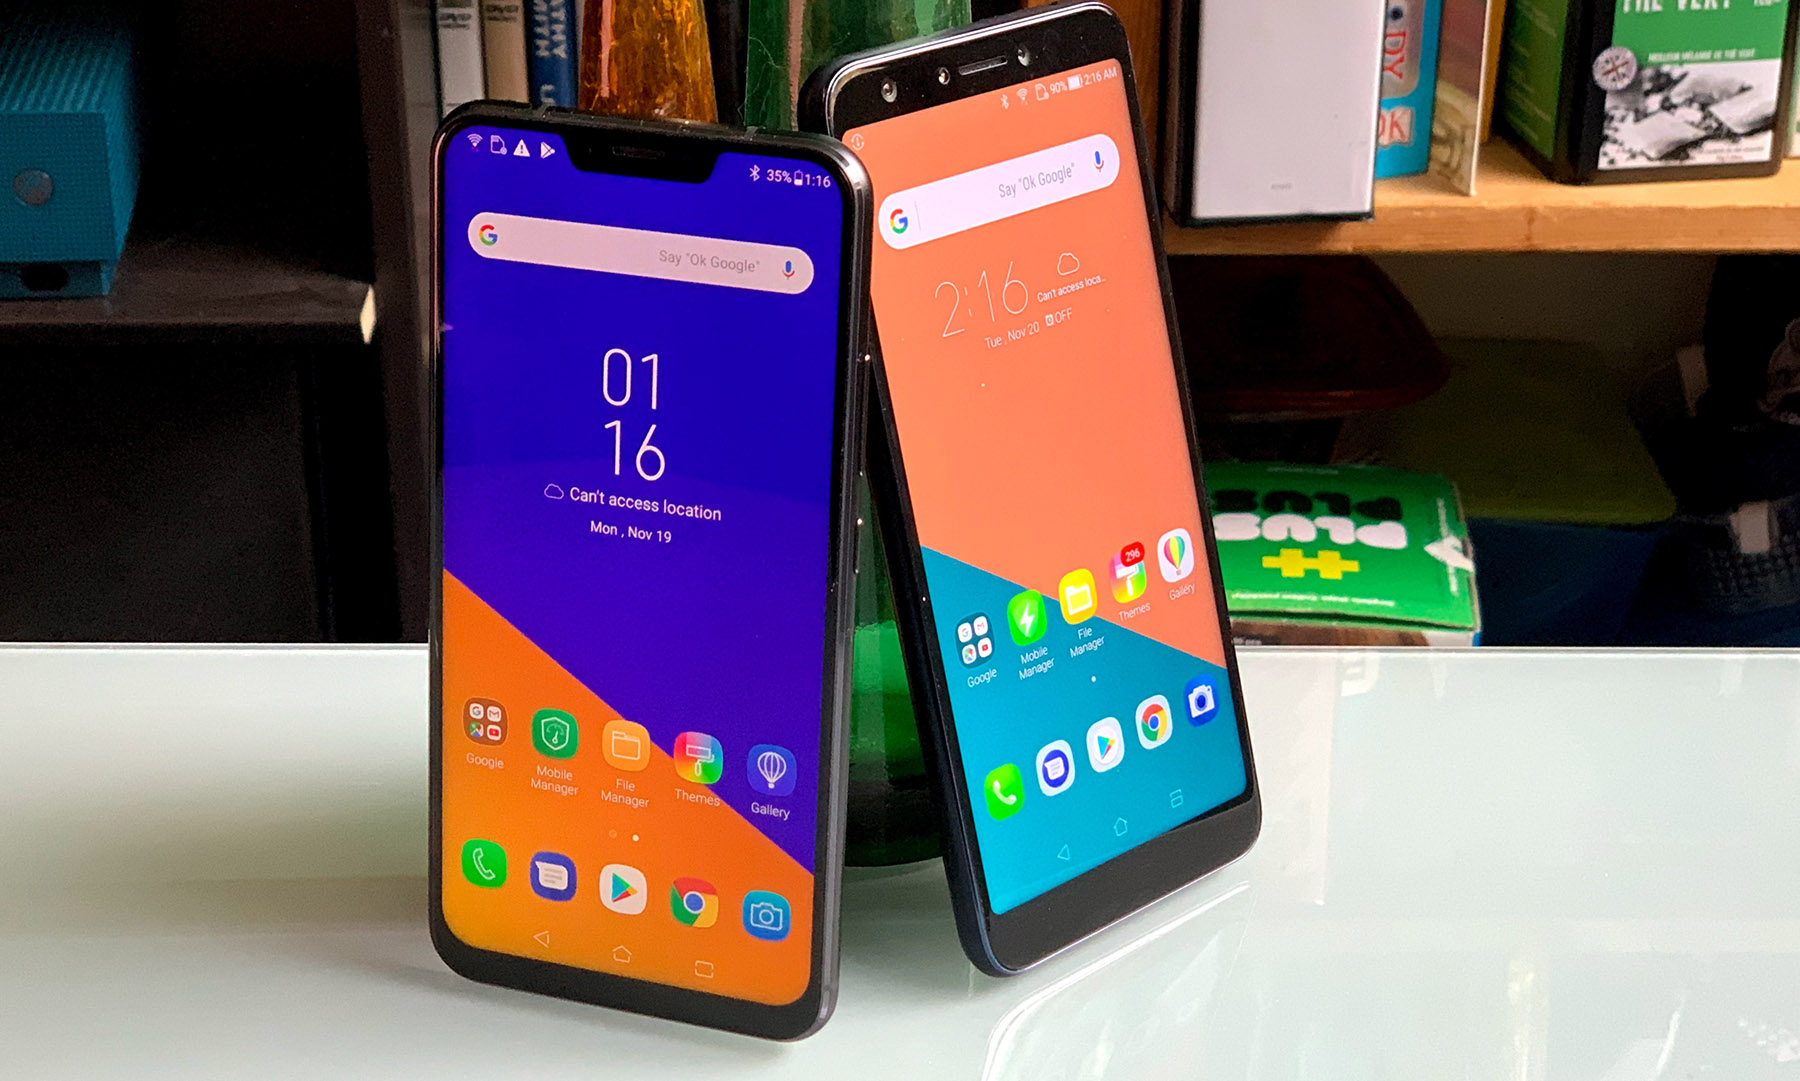 ASUS ZenFone 5Z and 5Q